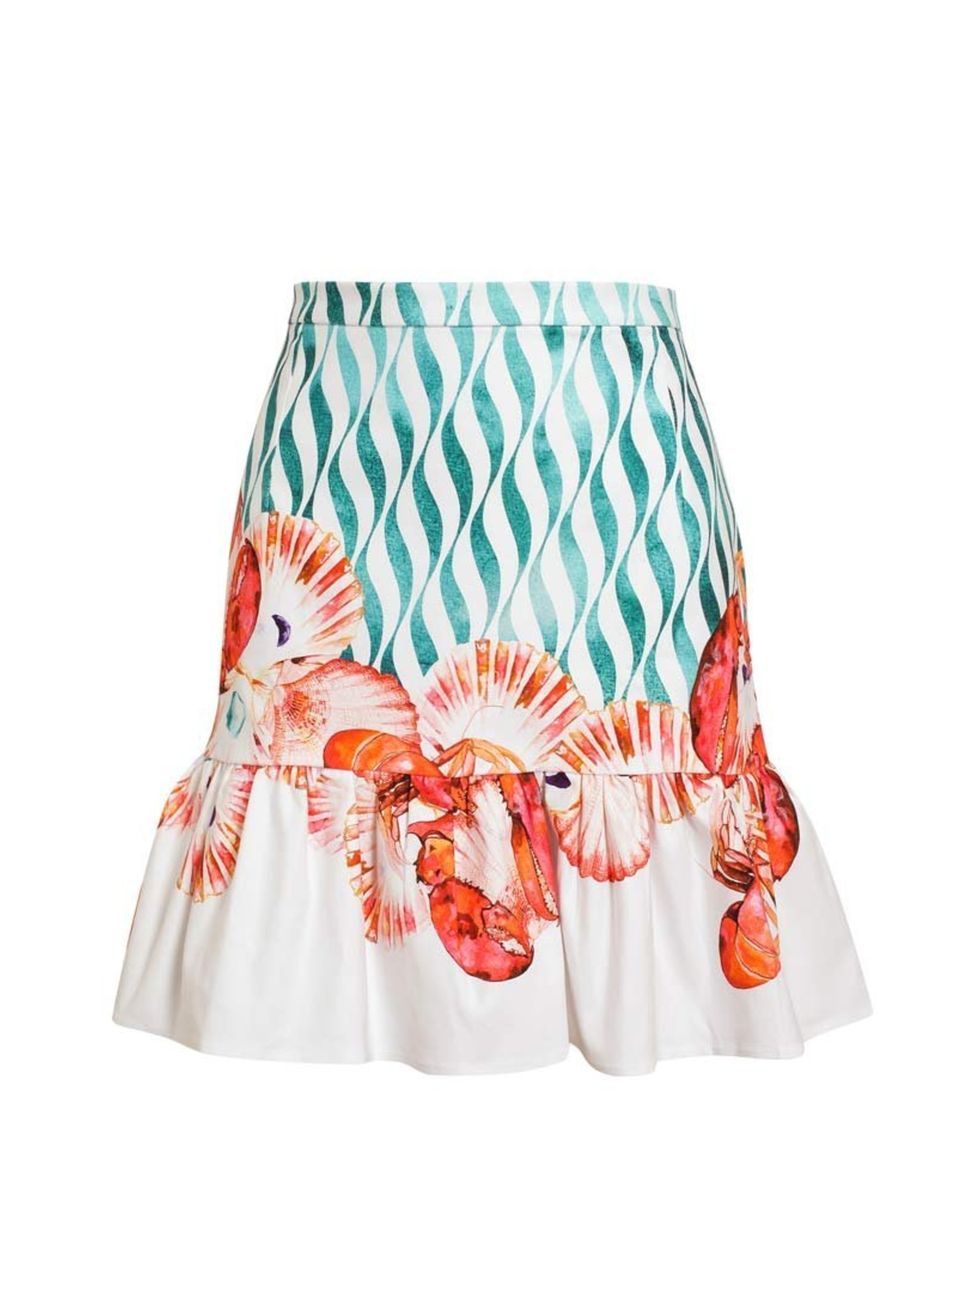 <p>Mind out for the claws.</p><p>Isolda skirt, £275 at <a href="http://www.brownsfashion.com/product/03I220690006/236/lobster-printed-cotton-miniskirt">Browns</a></p>